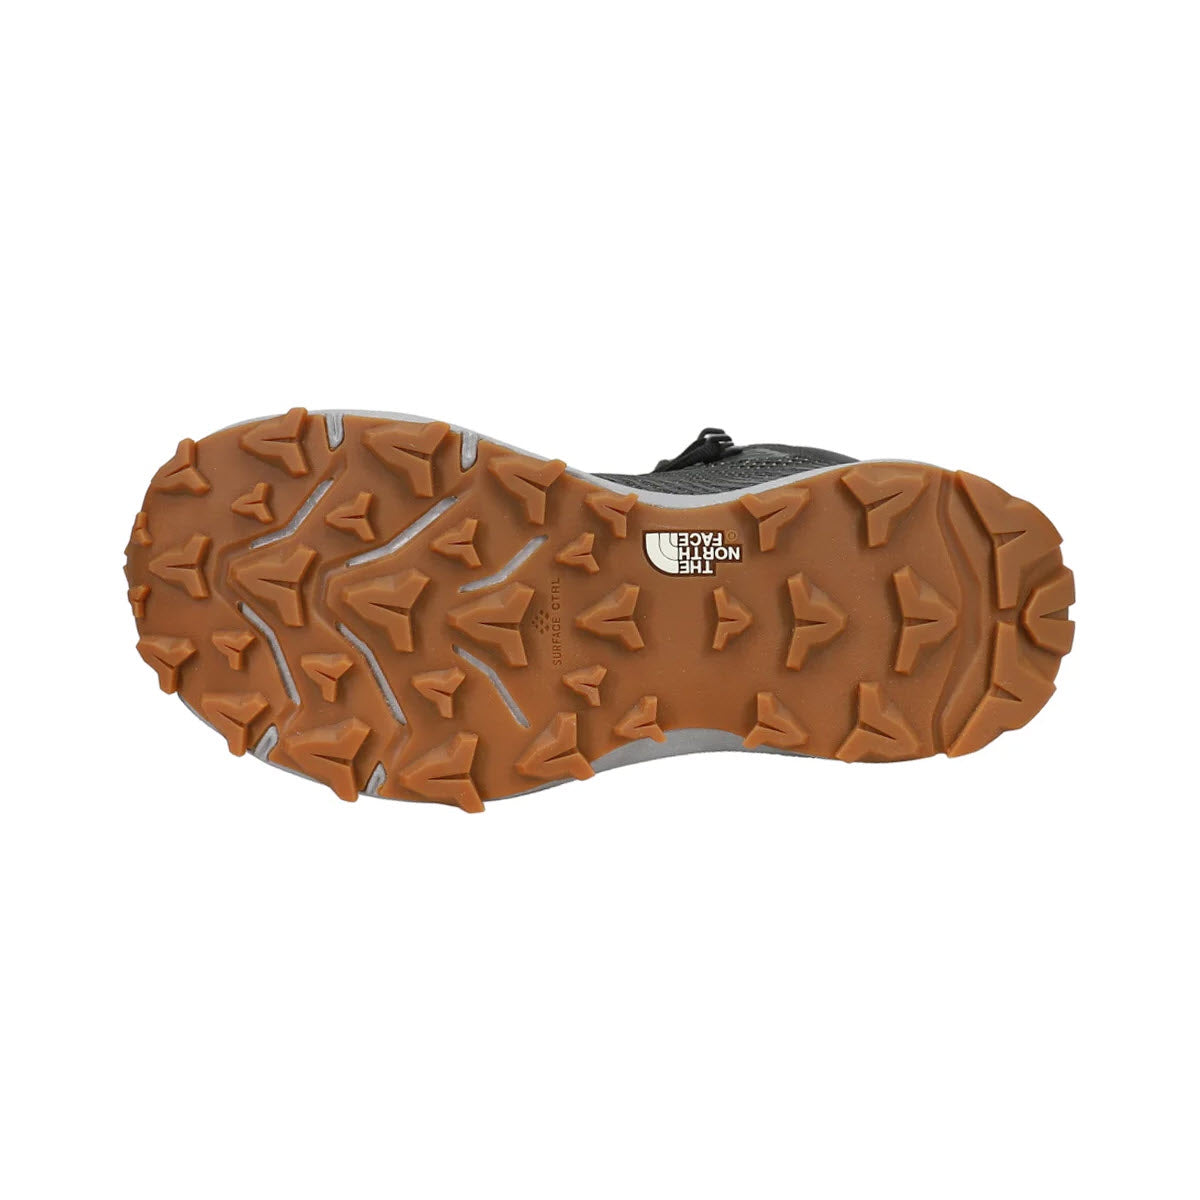 Sole of a North Face VECTIV FASTPACK MID FUTURELIGHT ASPHALT - WOMENS hiking shoe featuring lightweight VECTIV technology with rugged, multidirectional tread for grip, displayed against a white background.